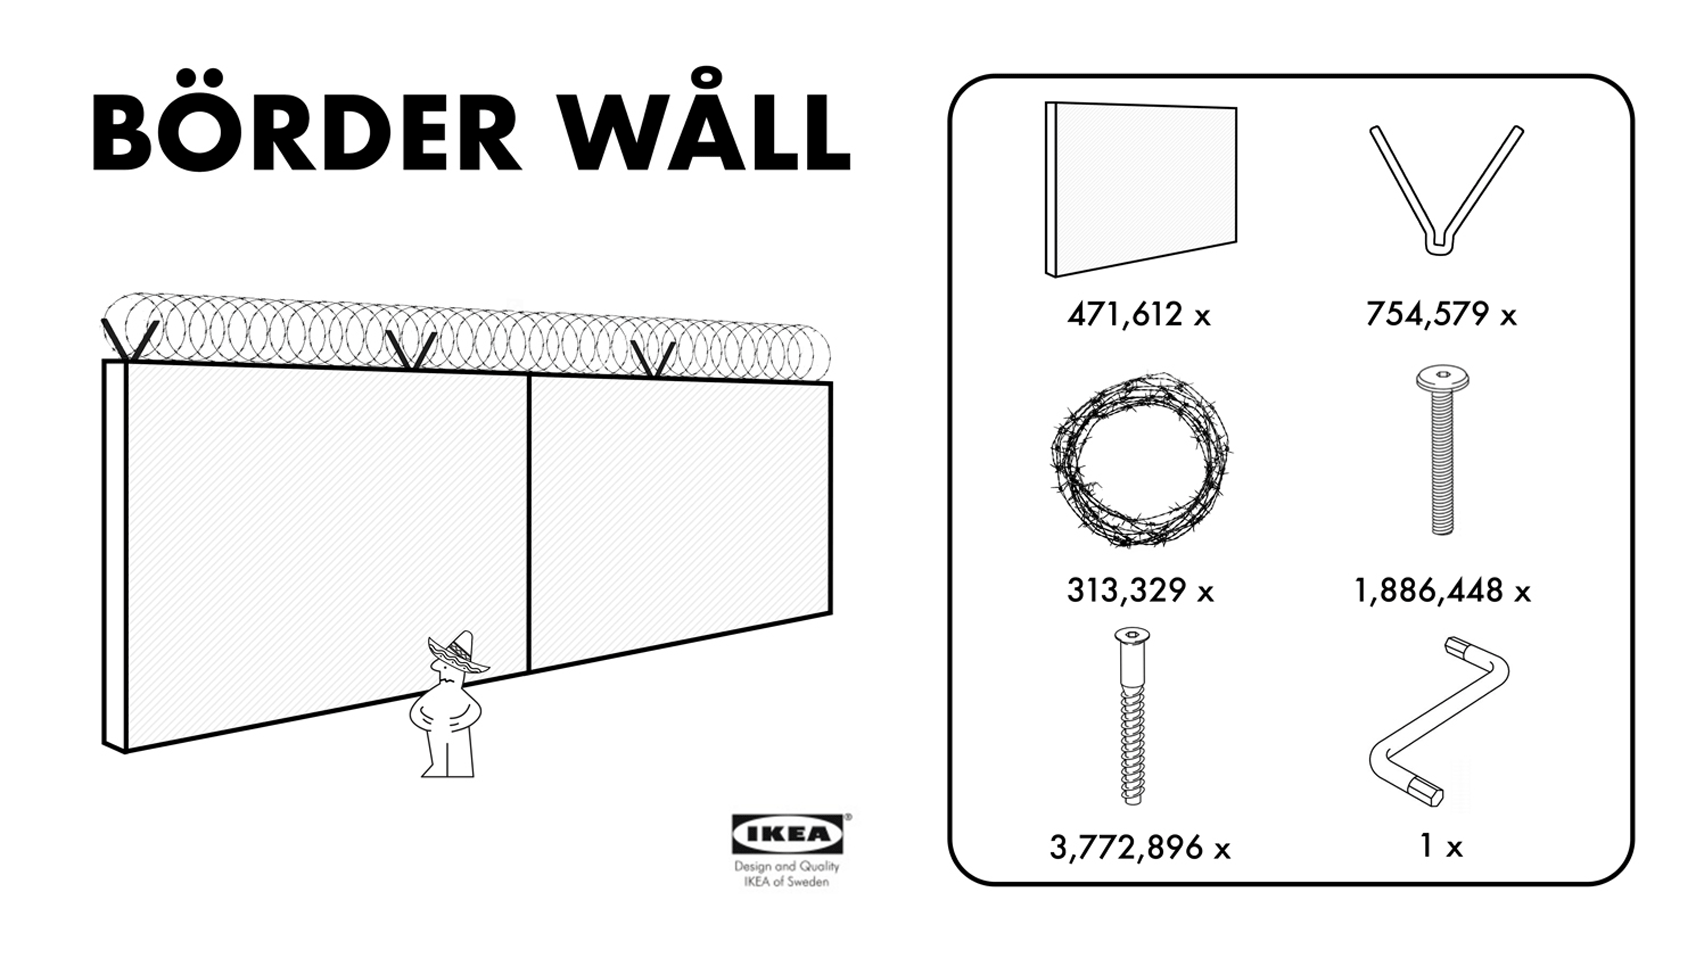 Ikea Border Wall Provides Trump With Affordable Construction Option